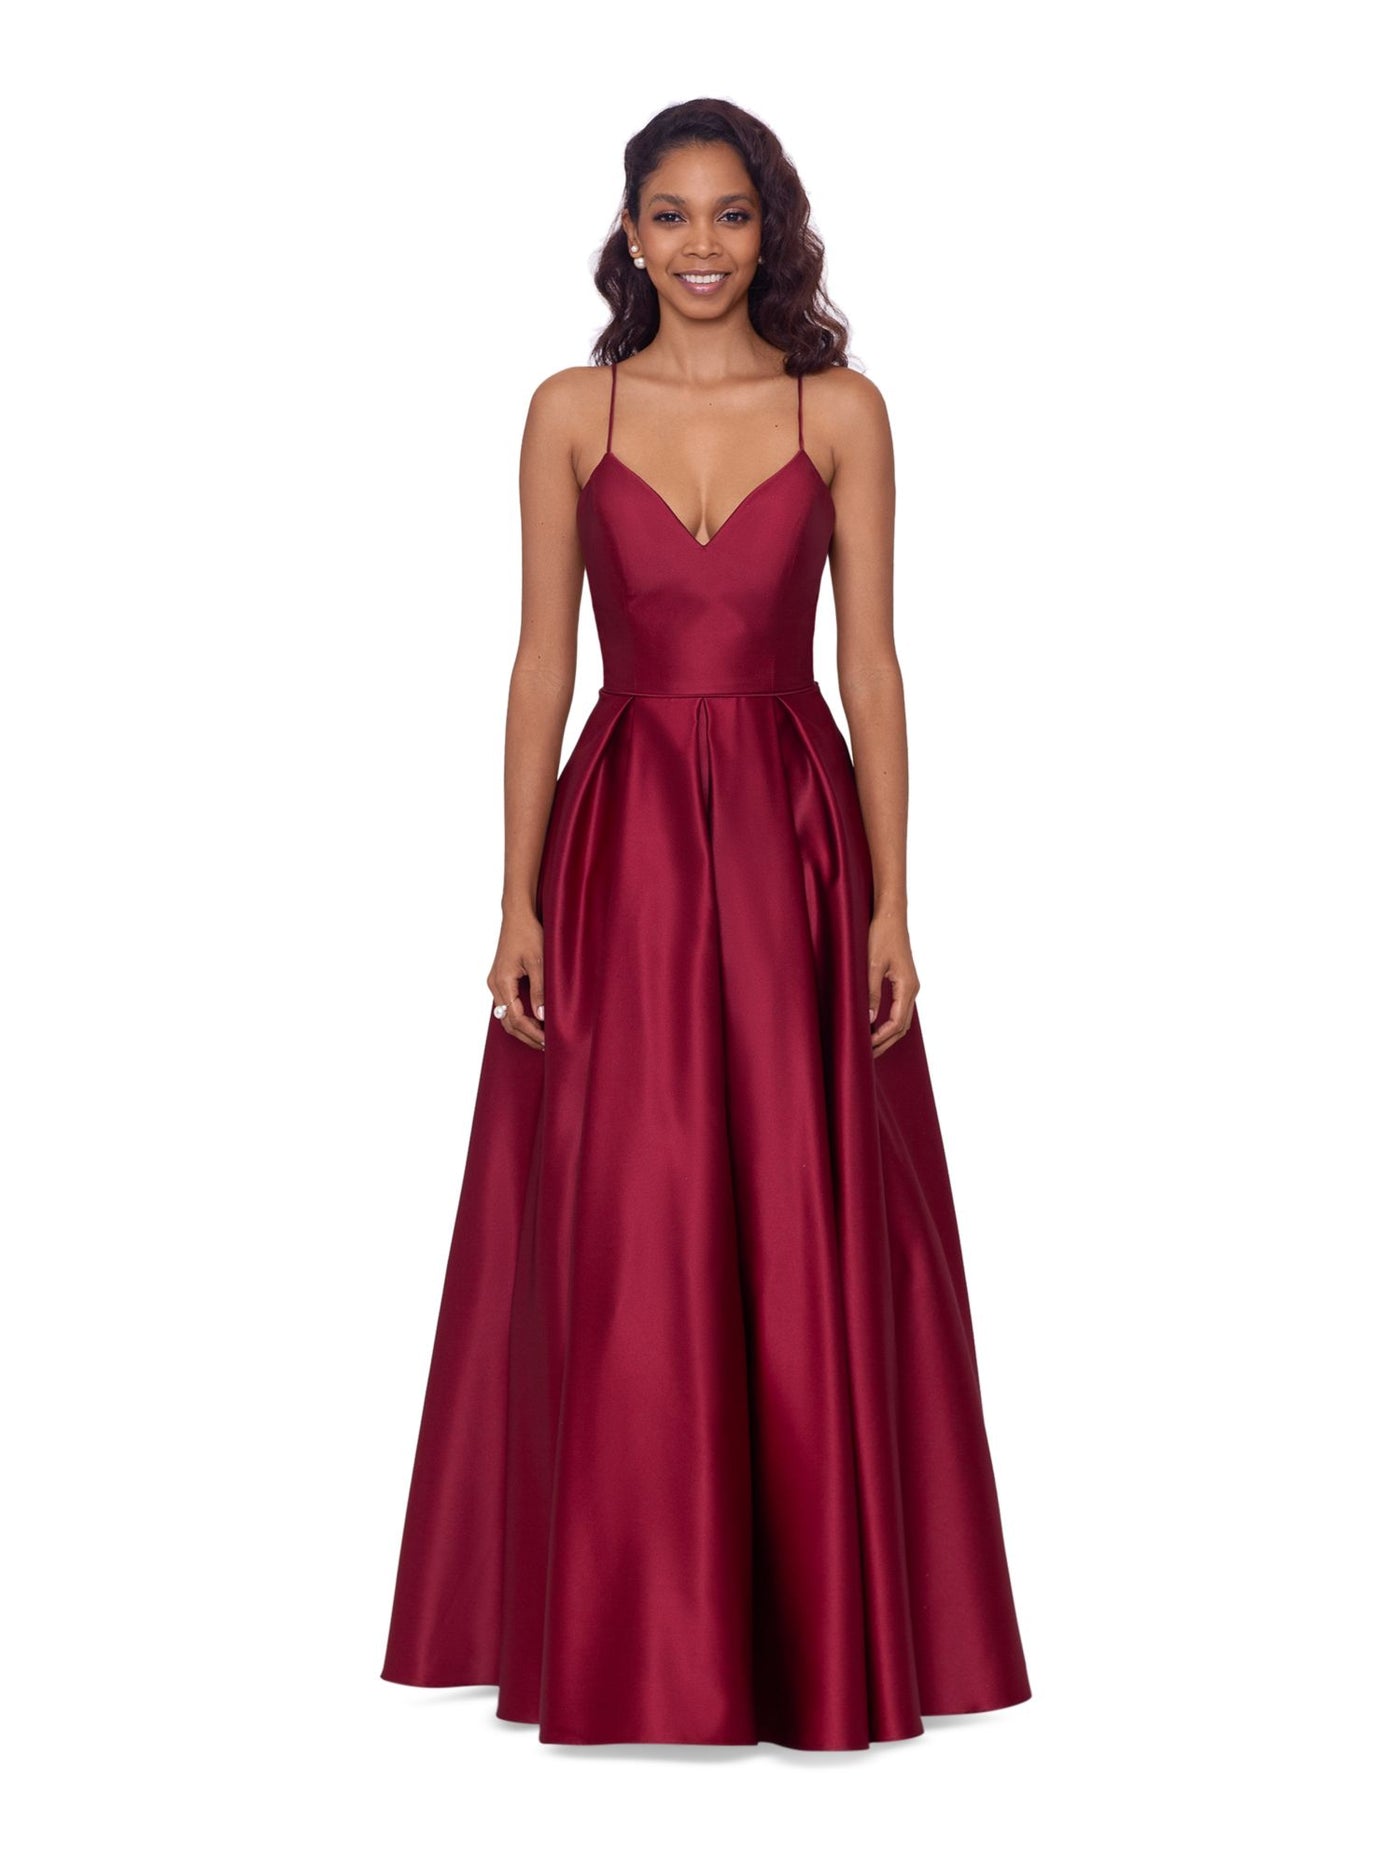 BLONDIE NITES Womens Burgundy Zippered Pleated Lace-up Back Pocketed Lined Spaghetti Strap V Neck Full-Length Formal Gown Dress 9